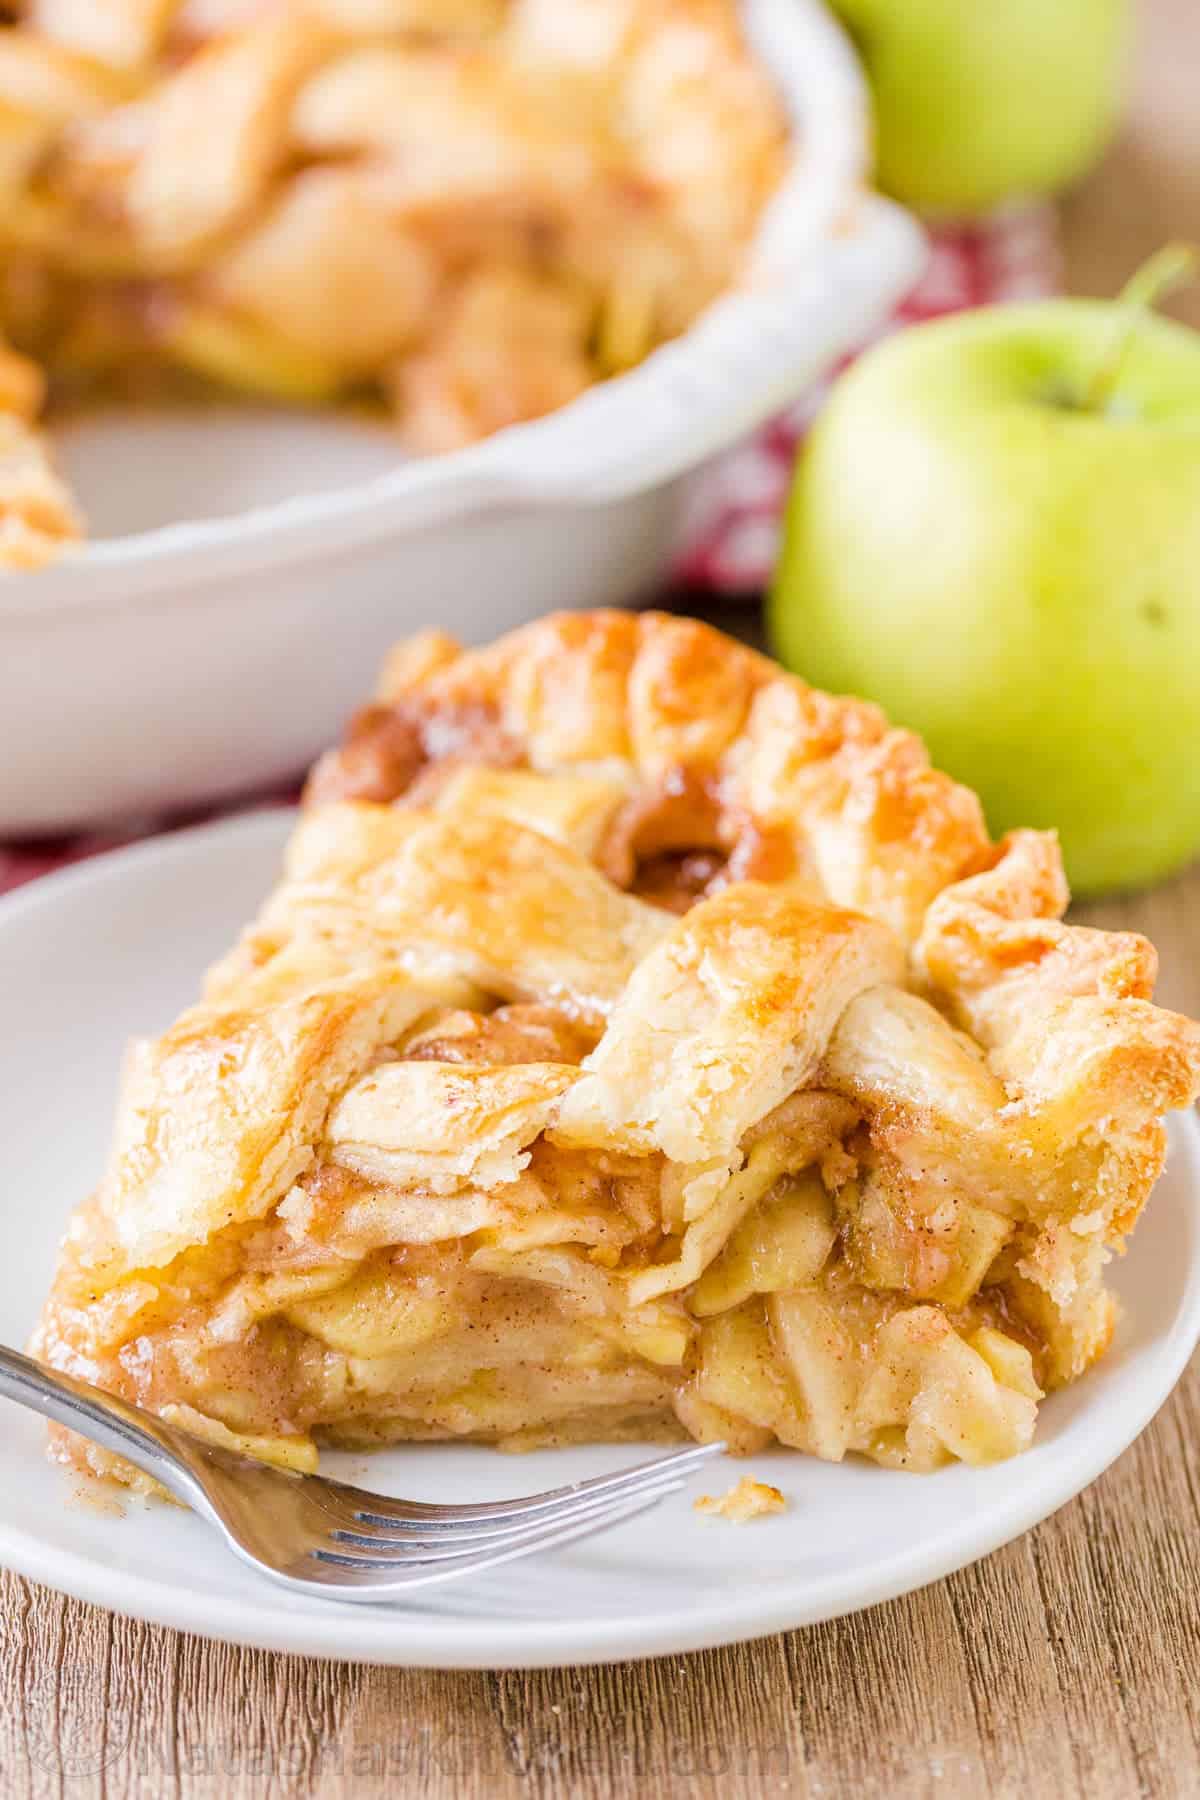 20 Apple Pie Filling Recipes » Fast and Fun Meals